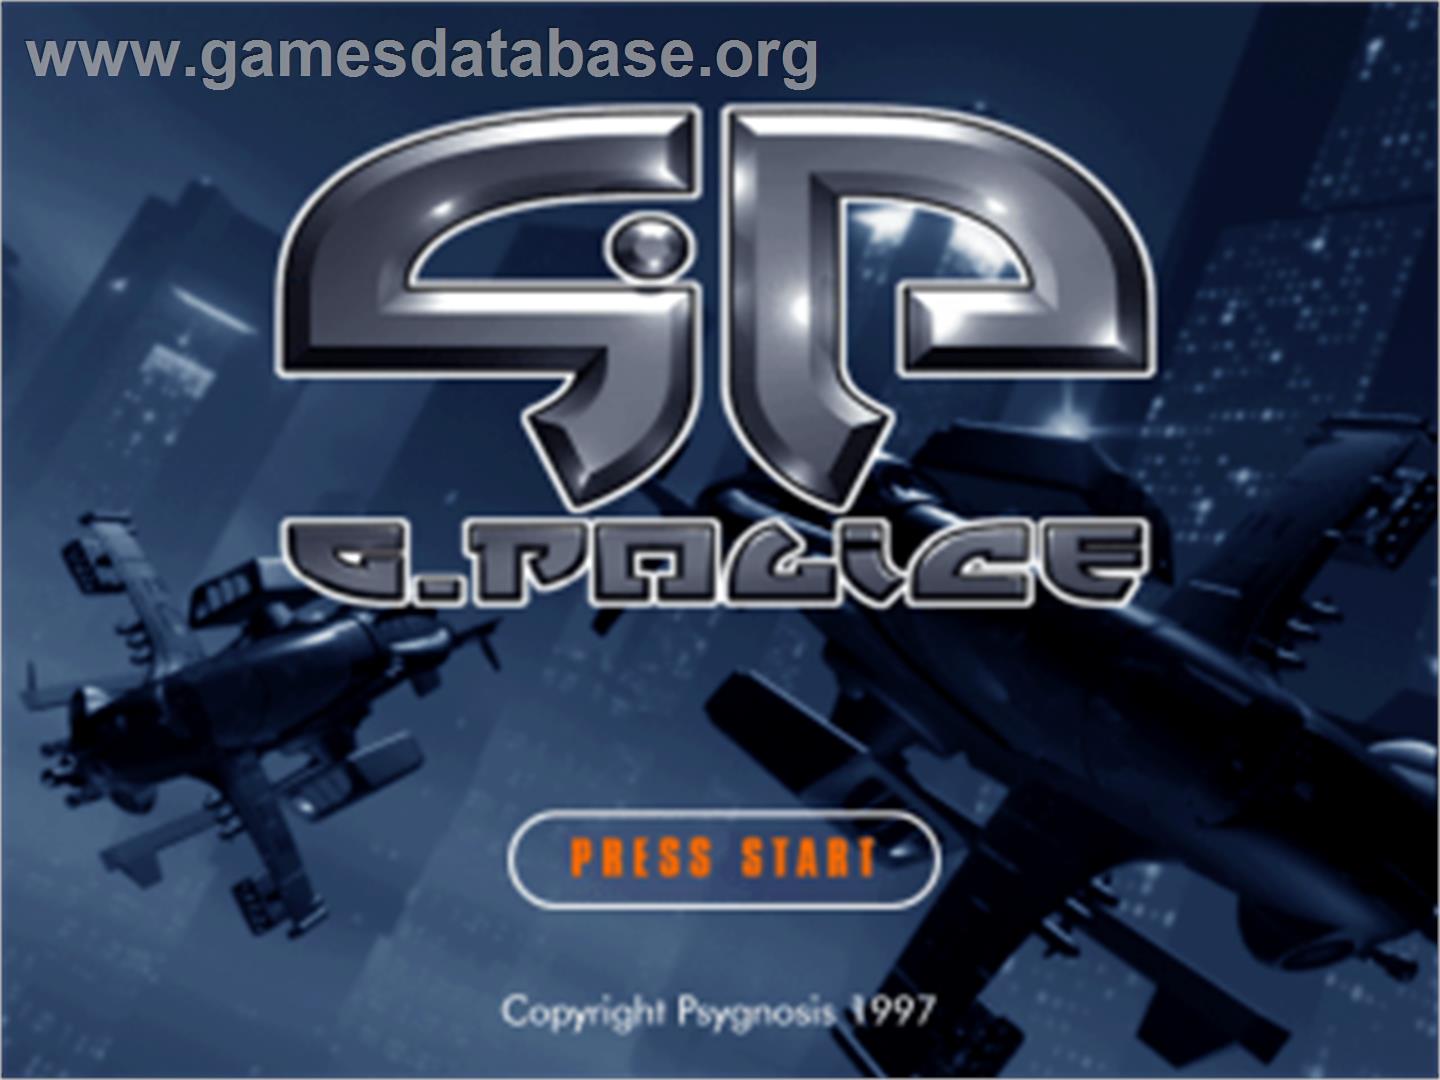 G-Police - Sony Playstation - Artwork - Title Screen